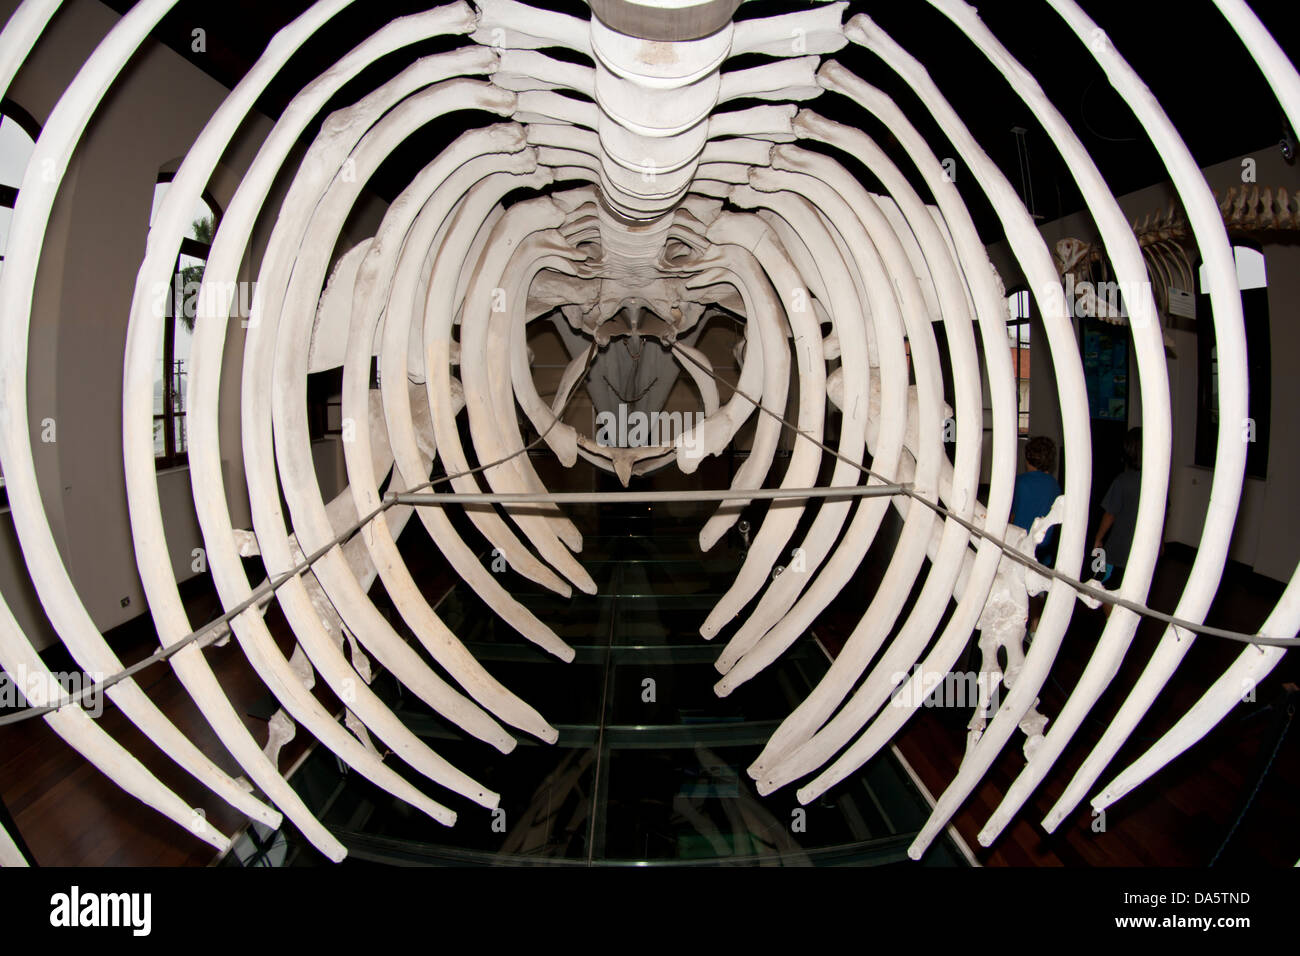 Exposition of a fin whale skeleton at the 'fishing museum' (museu de pesca) at Santos city, Sao Paulo, Brazil. Stock Photo